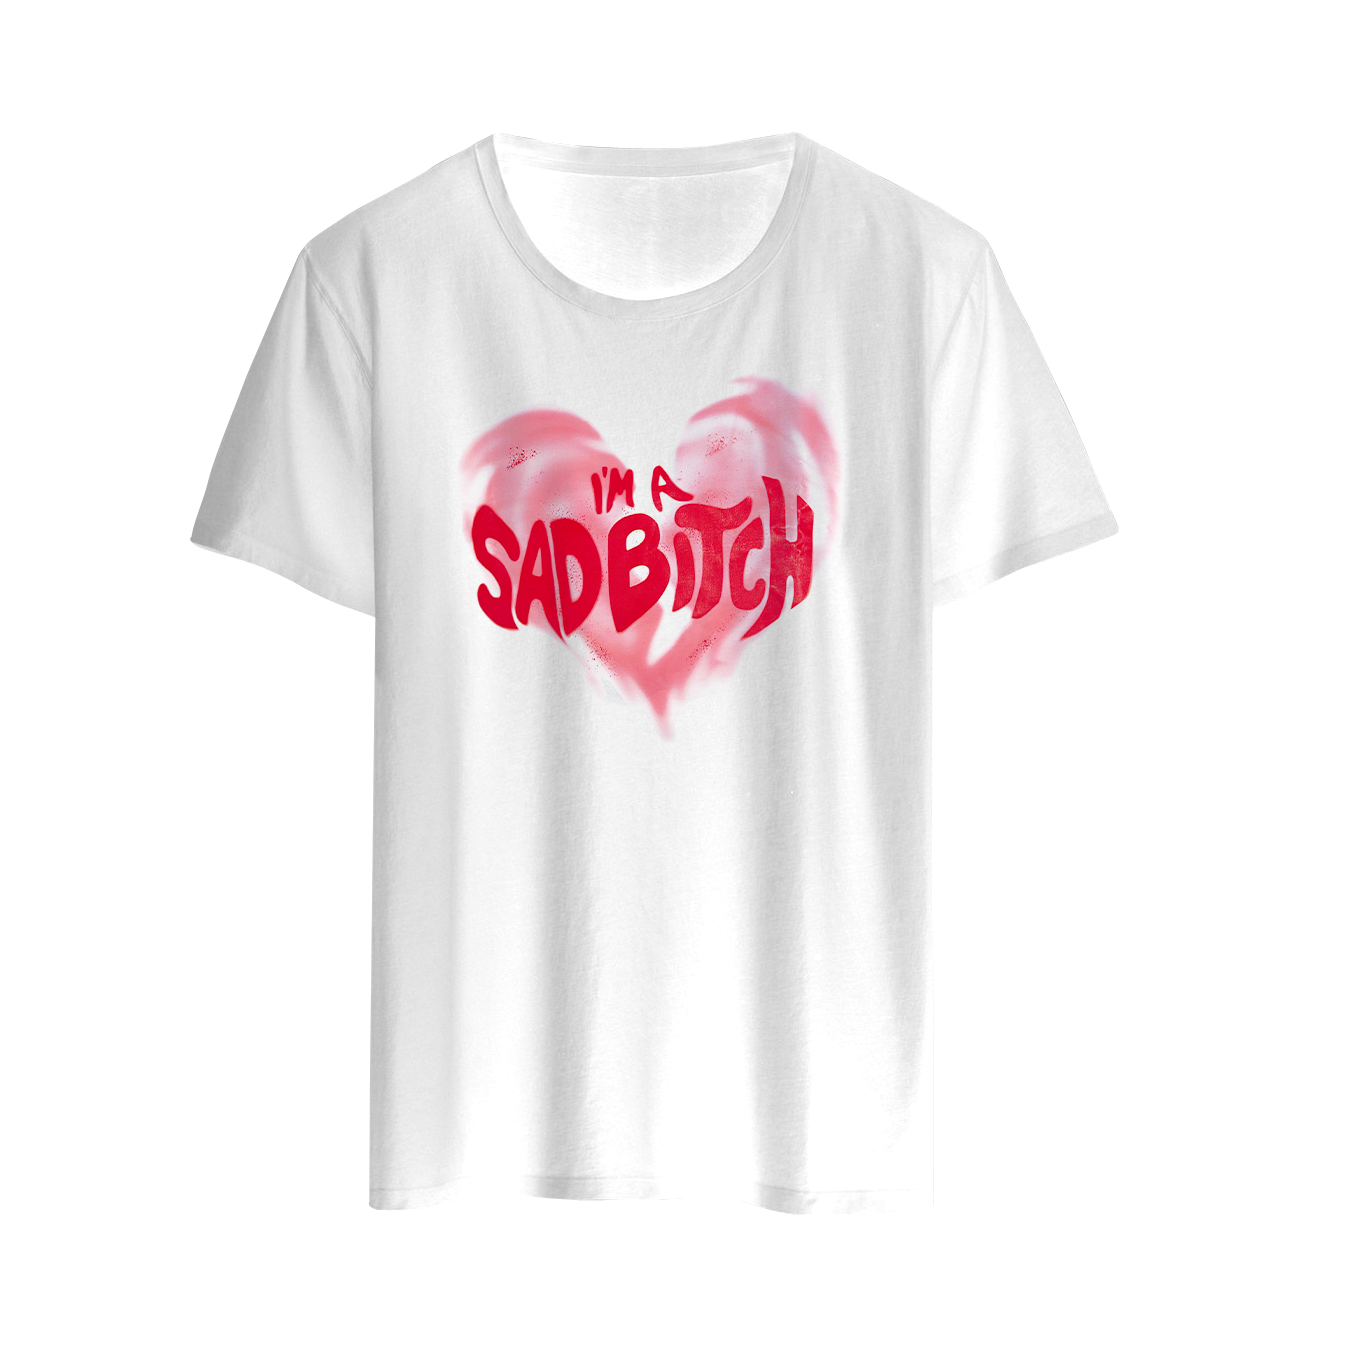 I'm a Sad Bitch Signed T-Shirt Limited collection